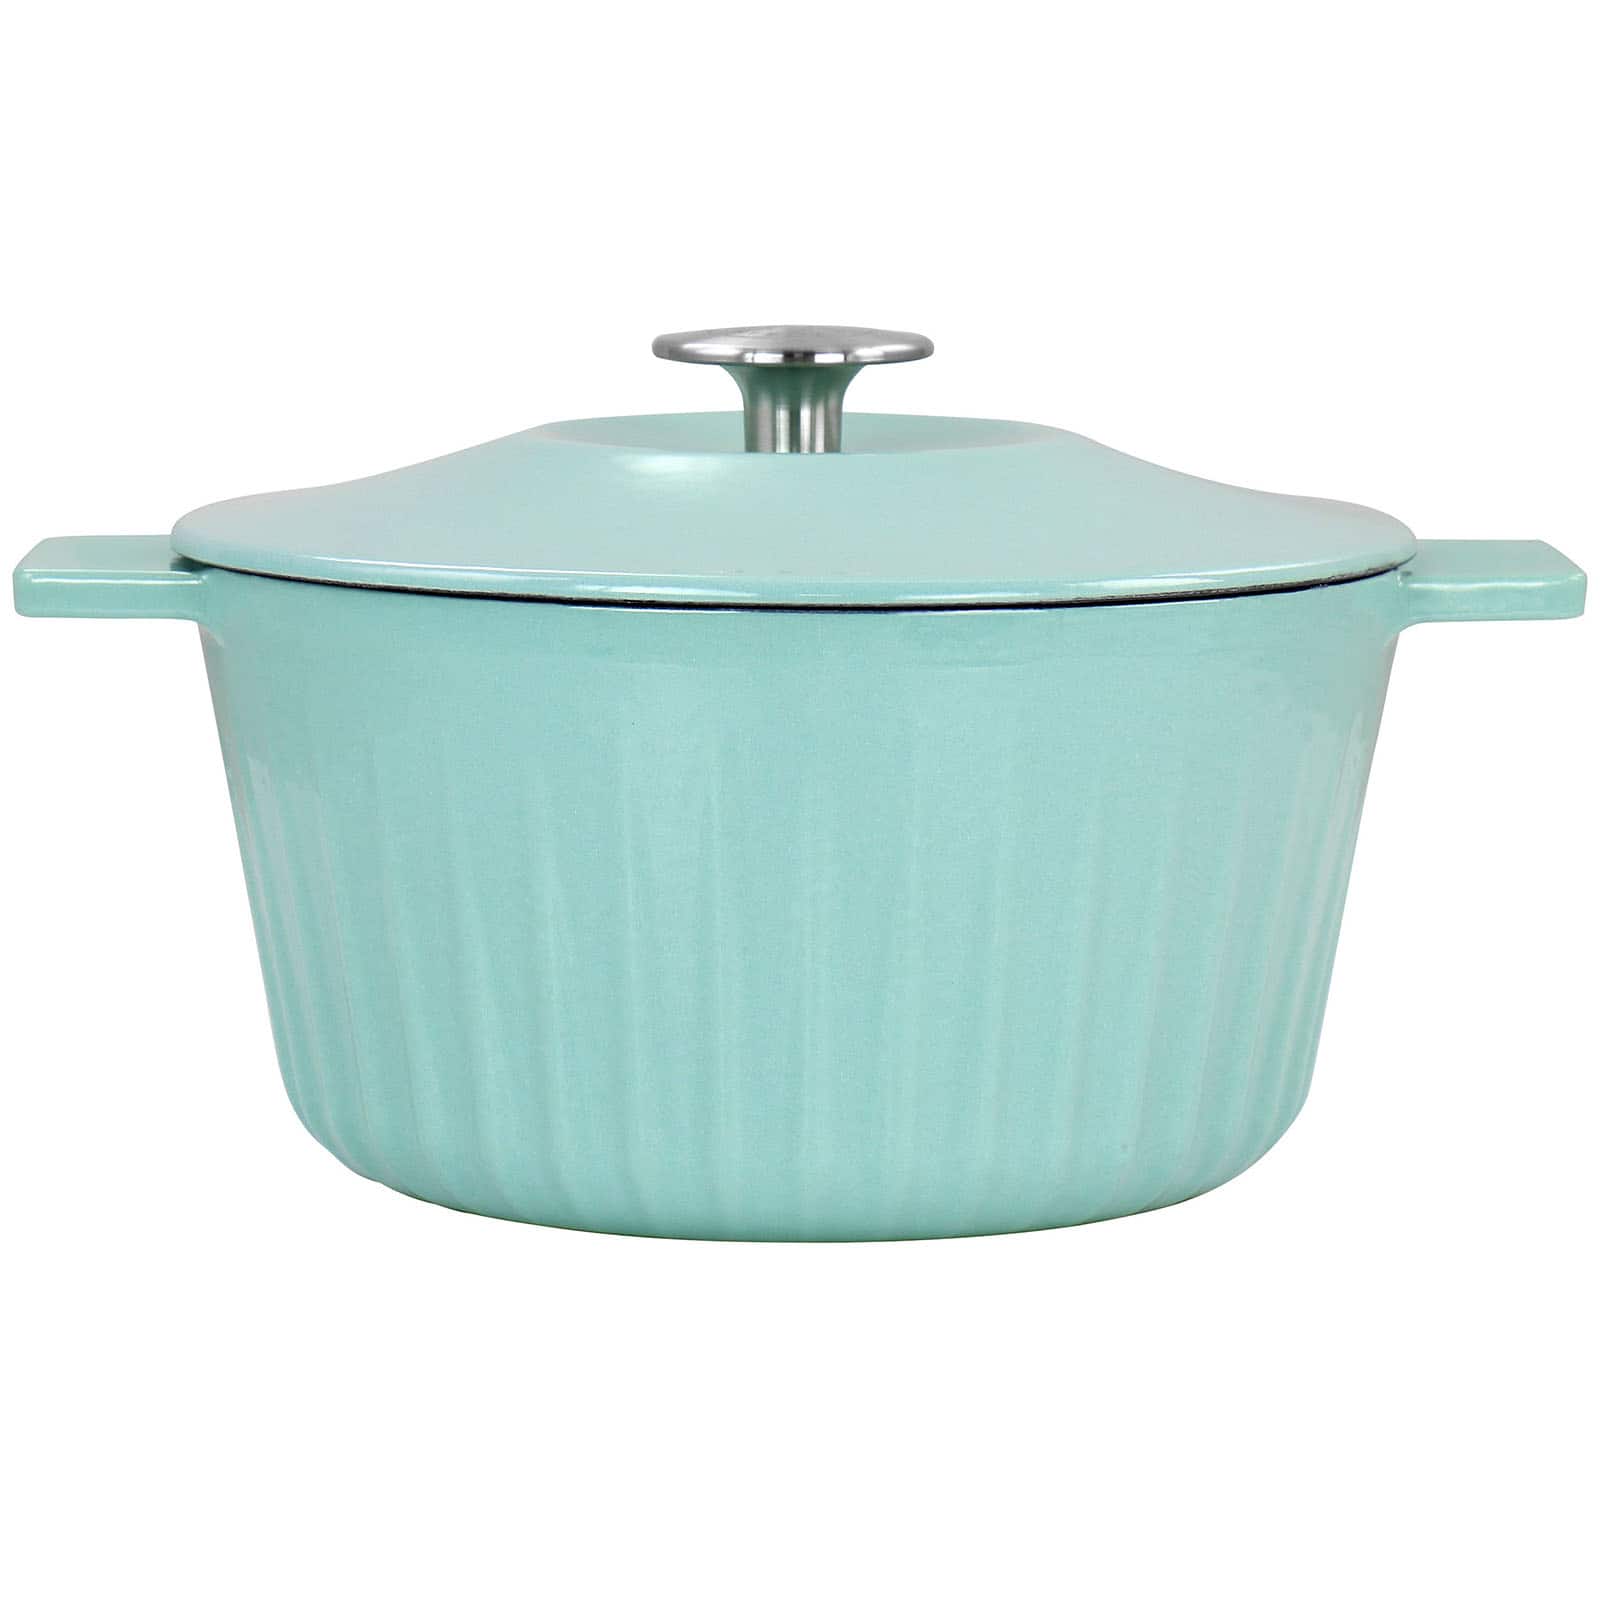 Martha Stewart Everyday 5 Quart Dutch Oven with Lid in Turquoise